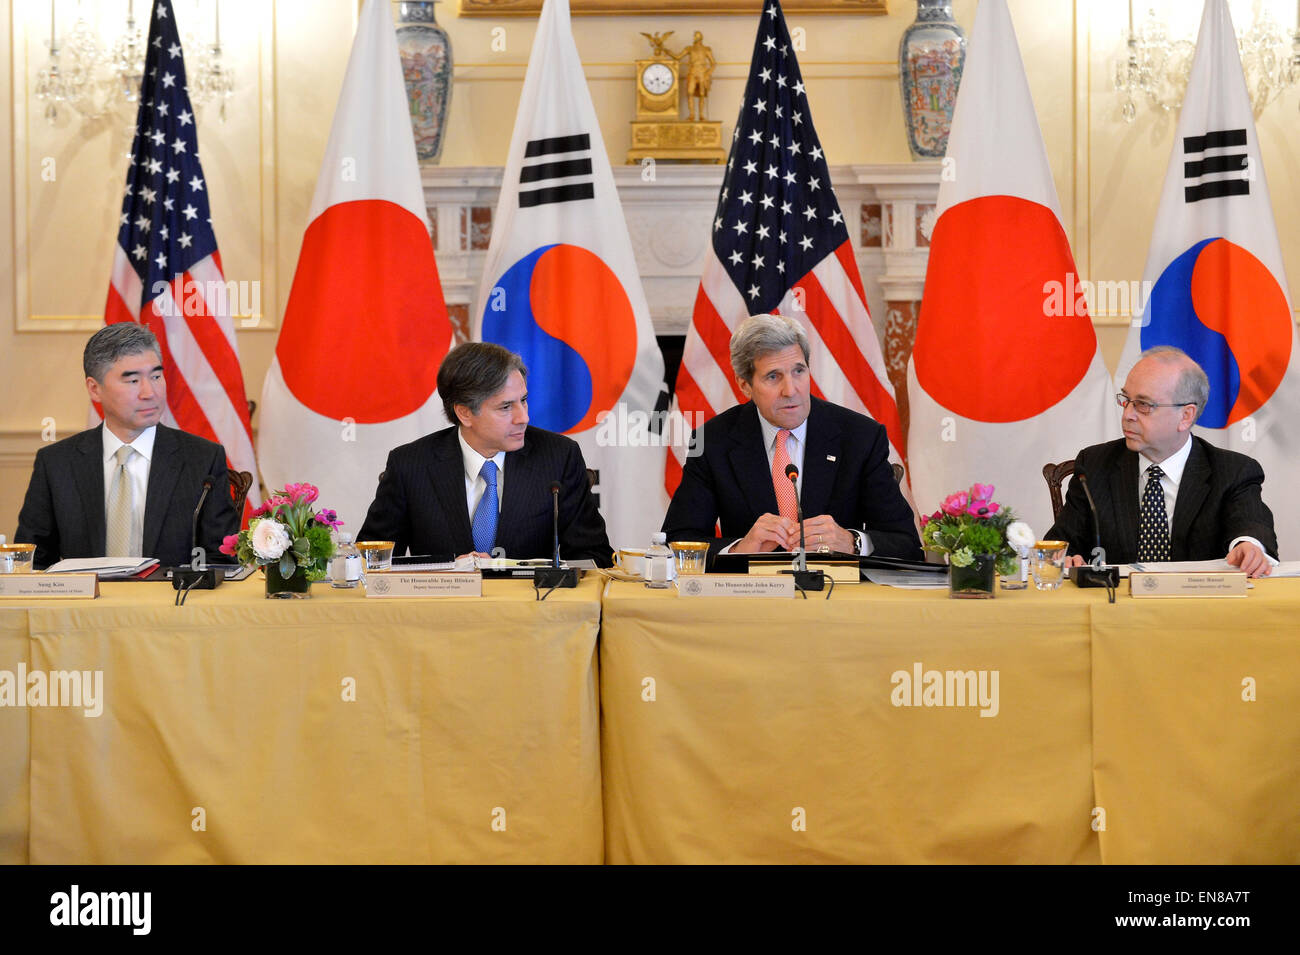 U.S. Secretary of State John Kerry joins Deputy Secretary of State Tony Blinken's meeting with his counterparts, Japanese Vice Foreign Minister Akitaka Saiki and Republic of Korea Vice Foreign Minister Cho Tae-yong, at the U.S. Department of State in Washington, D.C., on April 15, 2015. Also pictured are Ambassador Sung Kim, Special Representative for North Korea Policy, and Assistant Secretary of State for East Asian and Pacific Affairs Danny Russel. Stock Photo